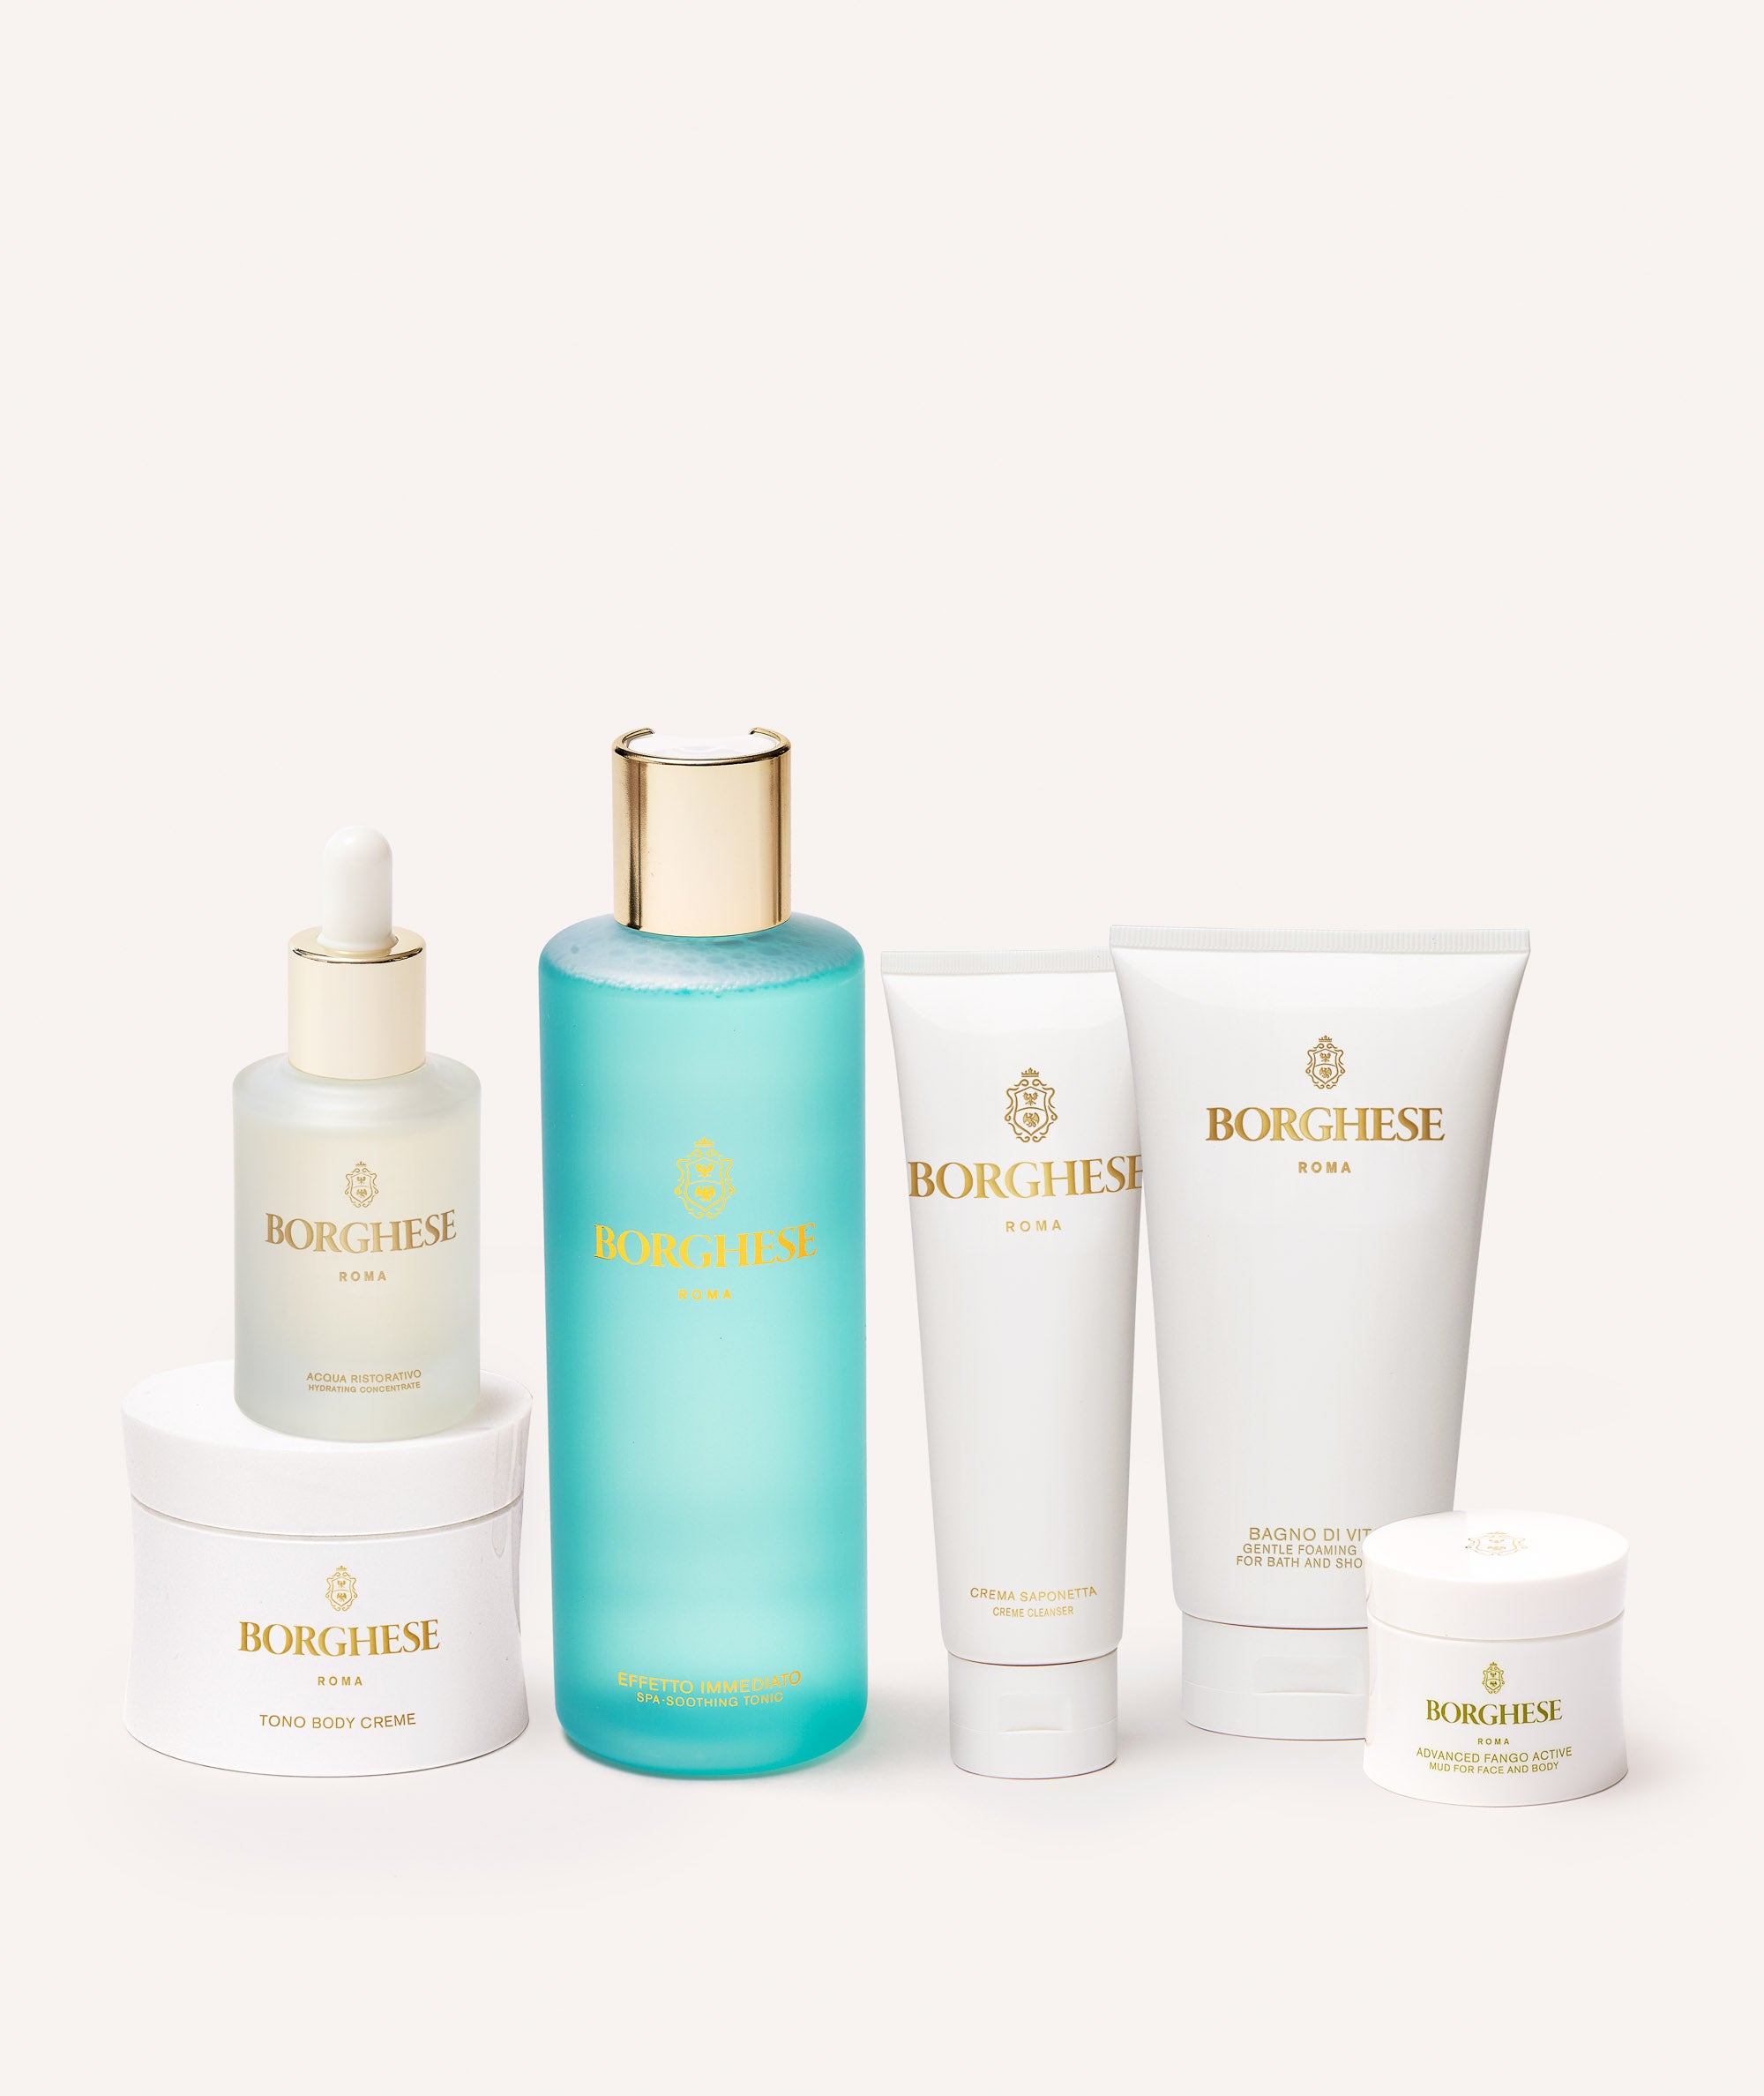 The Borghese 6-Piece Spa Rituals Gift Set contents